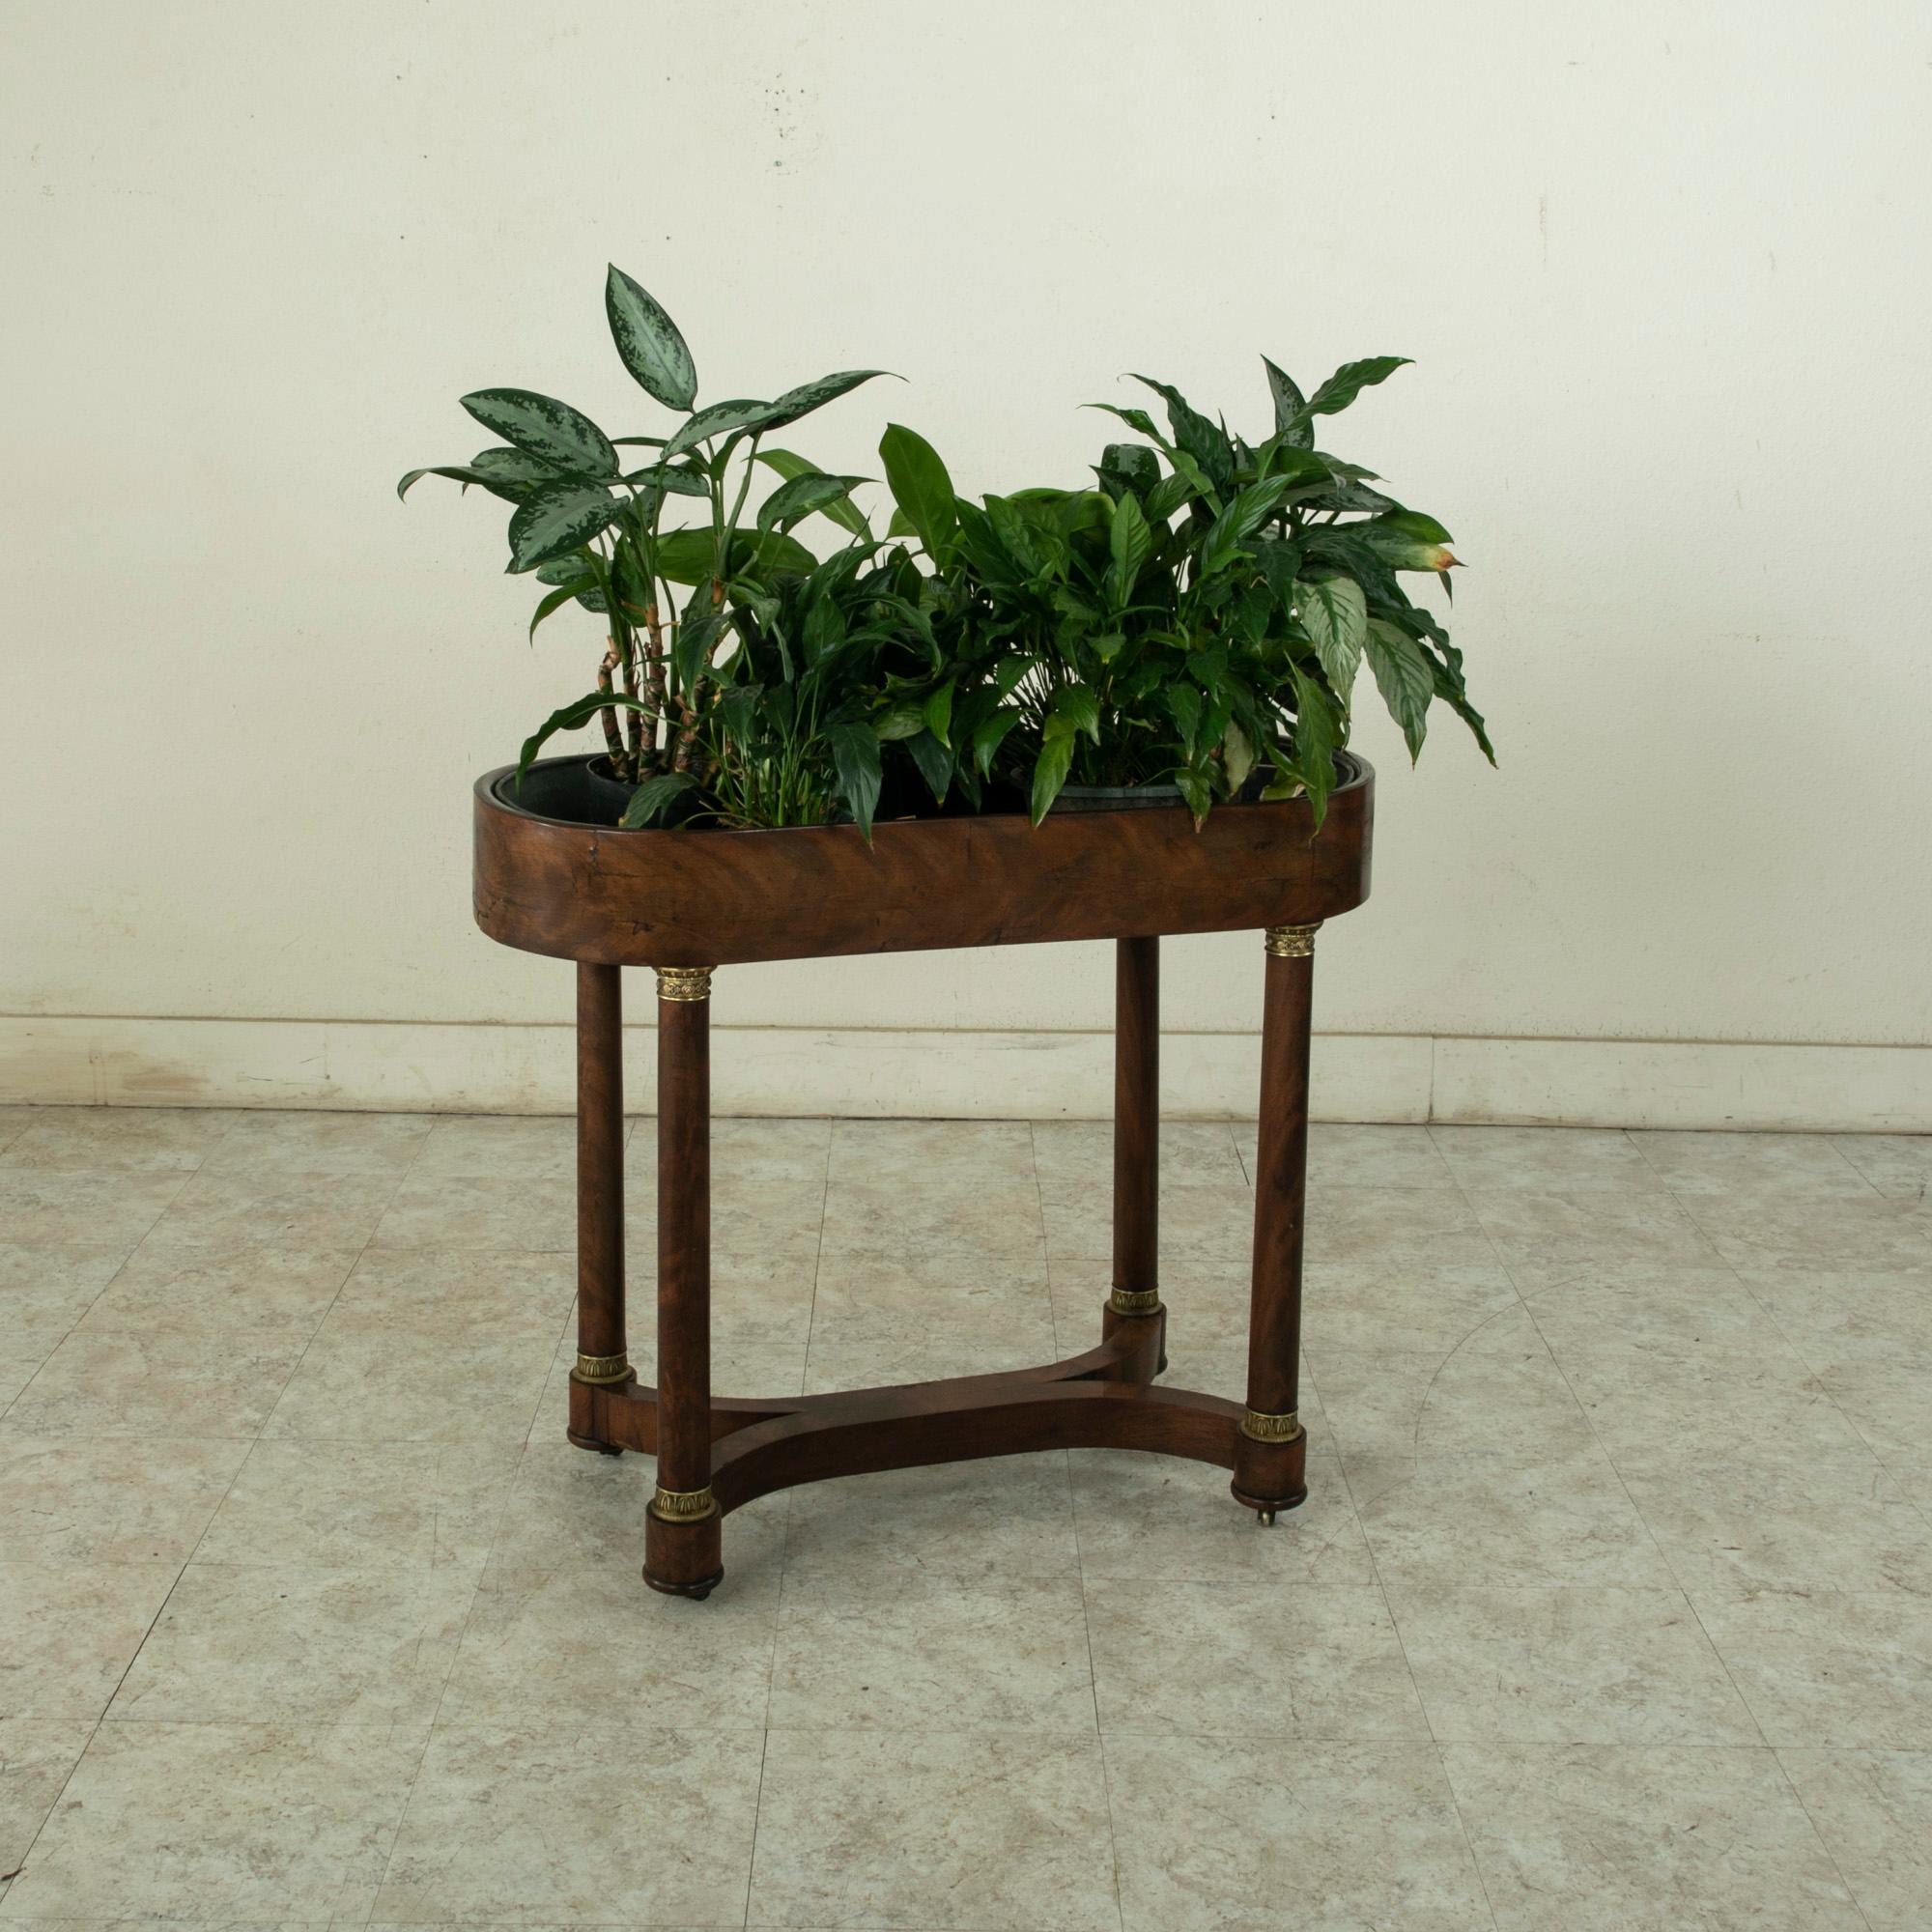 This French Empire style planter or jardiniere from the early twentieth century features a mahogany base supported by four columns finished with bronze banding at their bases and capitals. The bronze elements are detailed with Egyptian water leaves